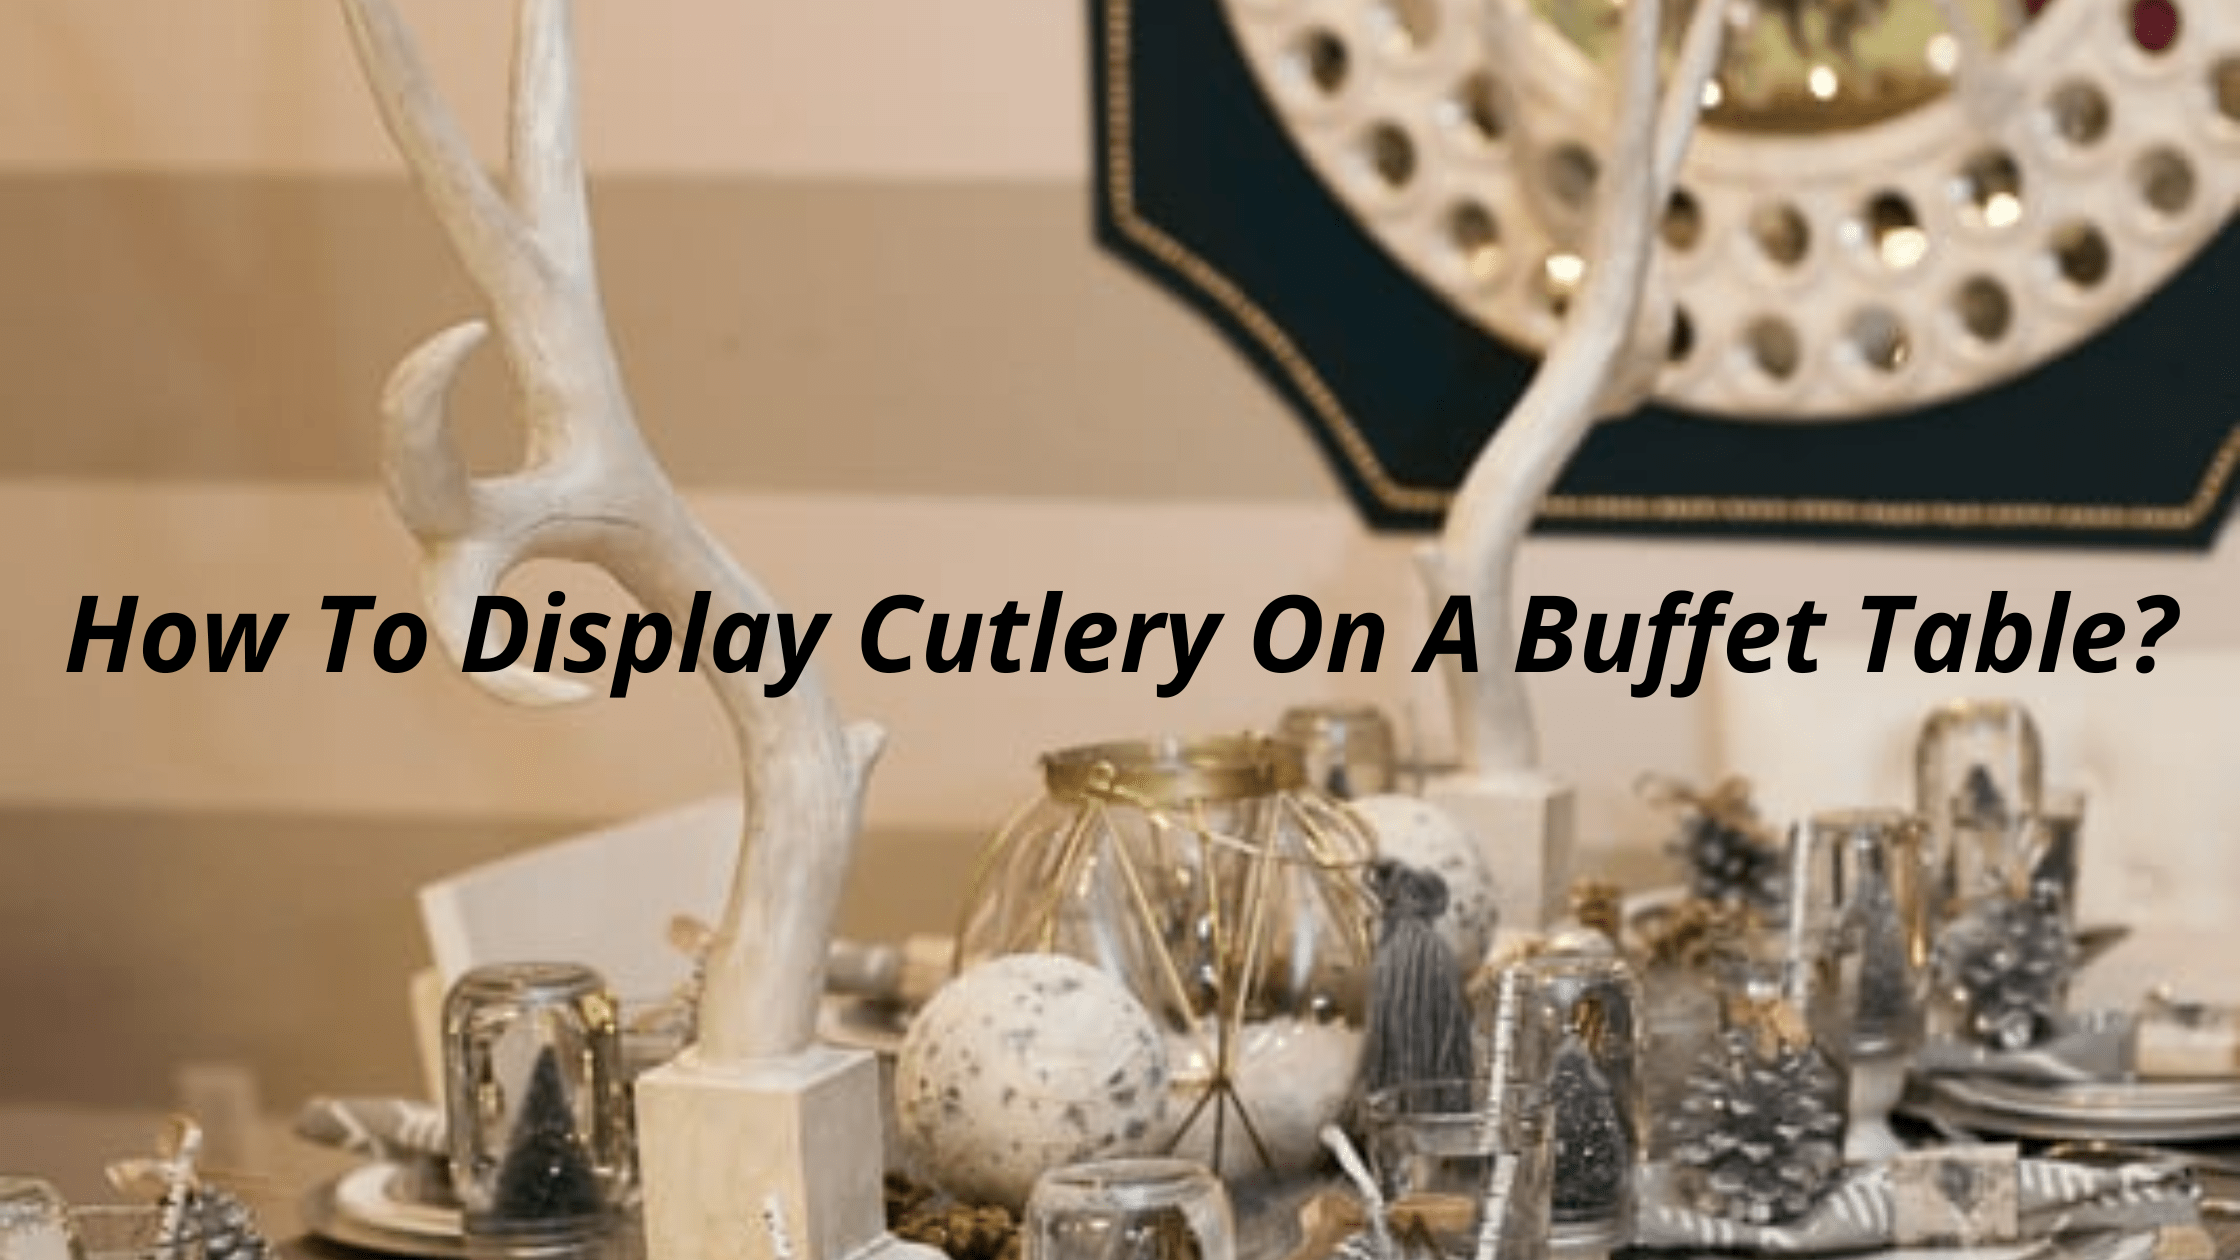 How To Display Cutlery On A Buffet Table?